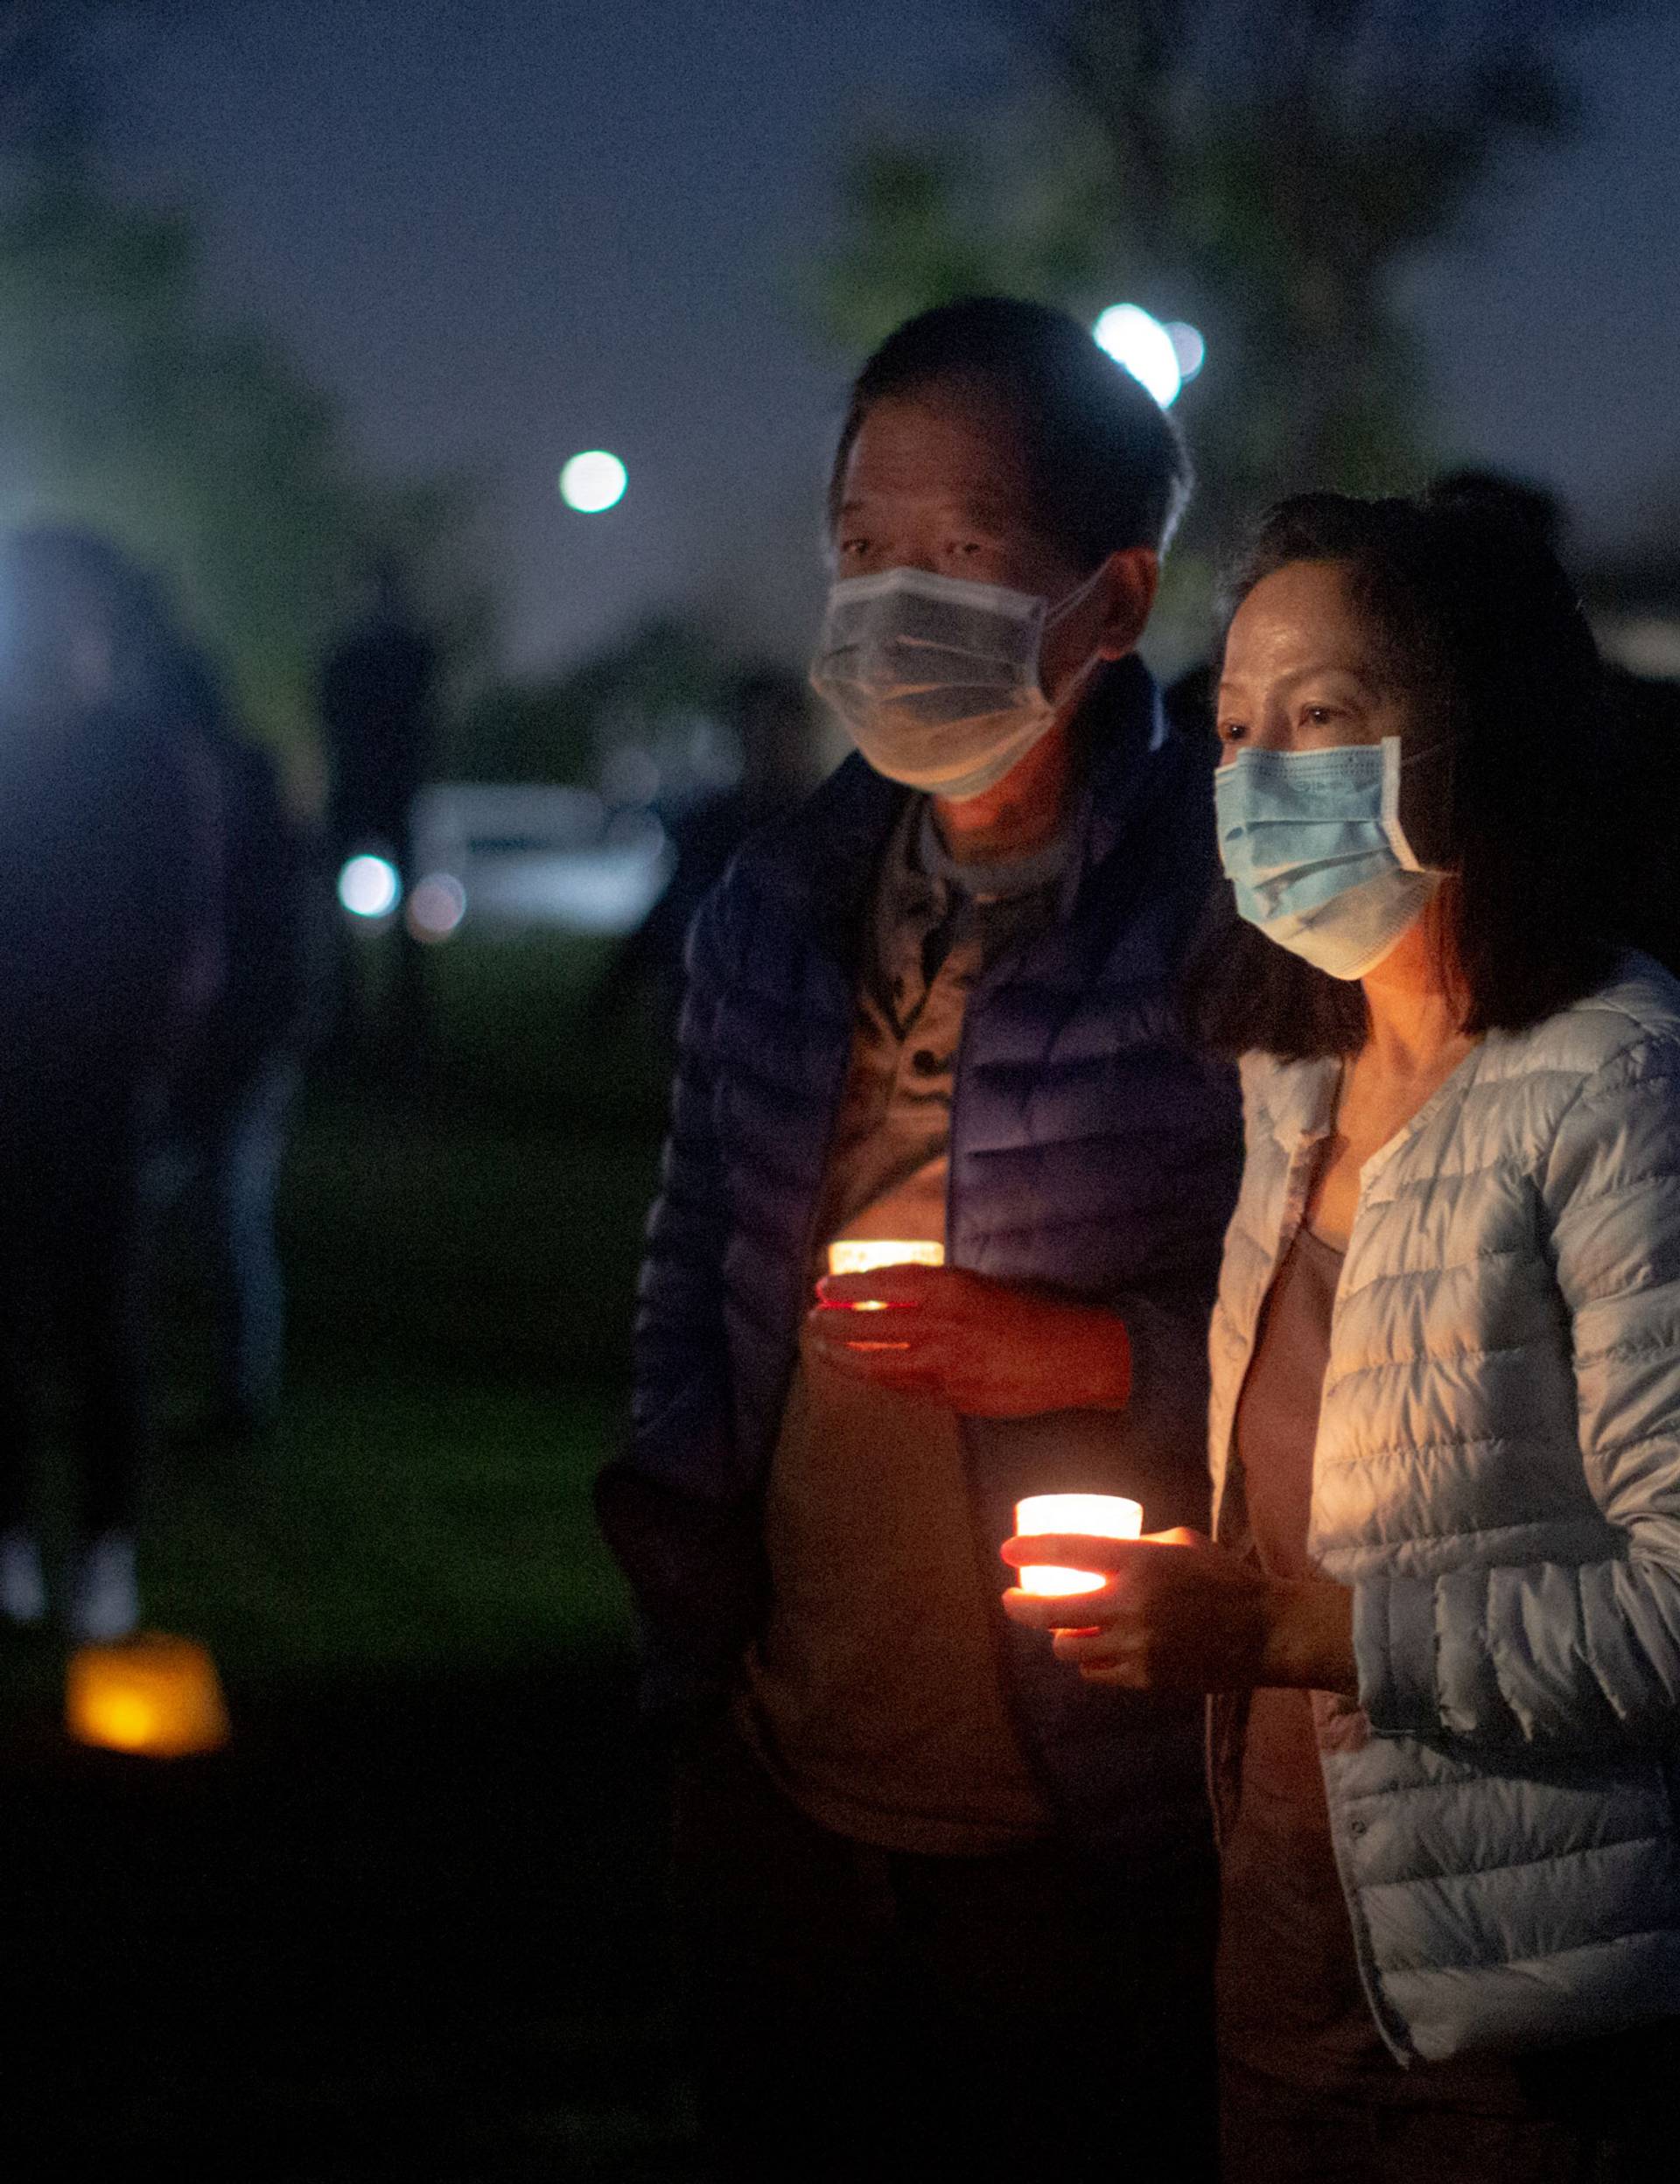 Dr. Mai Khanh Tran, center, stands with her husband, Manh Phi, while mourning at a vigil for those who lost their lives in the Atlanta spa shootings, at Community Center Park in Garden Grove, California, on March 24, 2021. Dr. Tran, a pediatrician, has been active in the fight against anti-Asian hate and has seen it continue to get worse through the years.